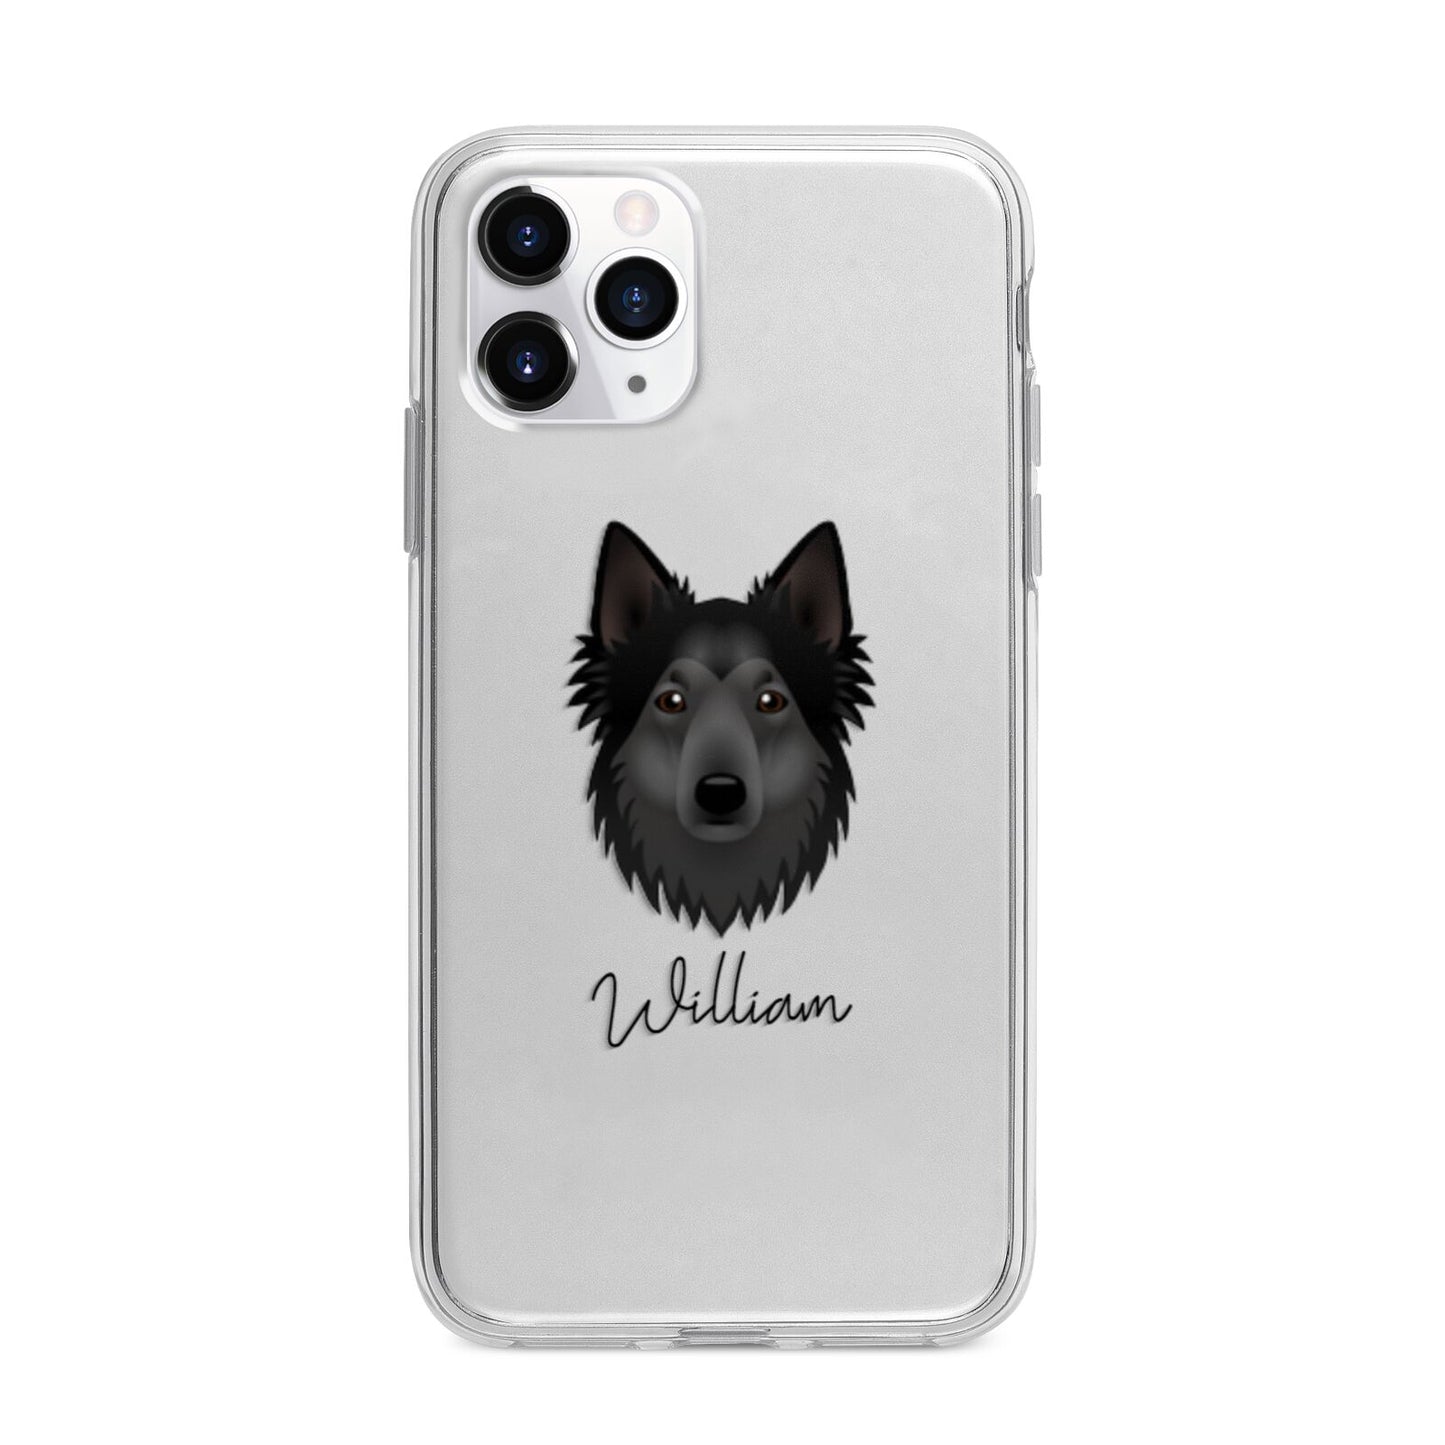 Shollie Personalised Apple iPhone 11 Pro Max in Silver with Bumper Case